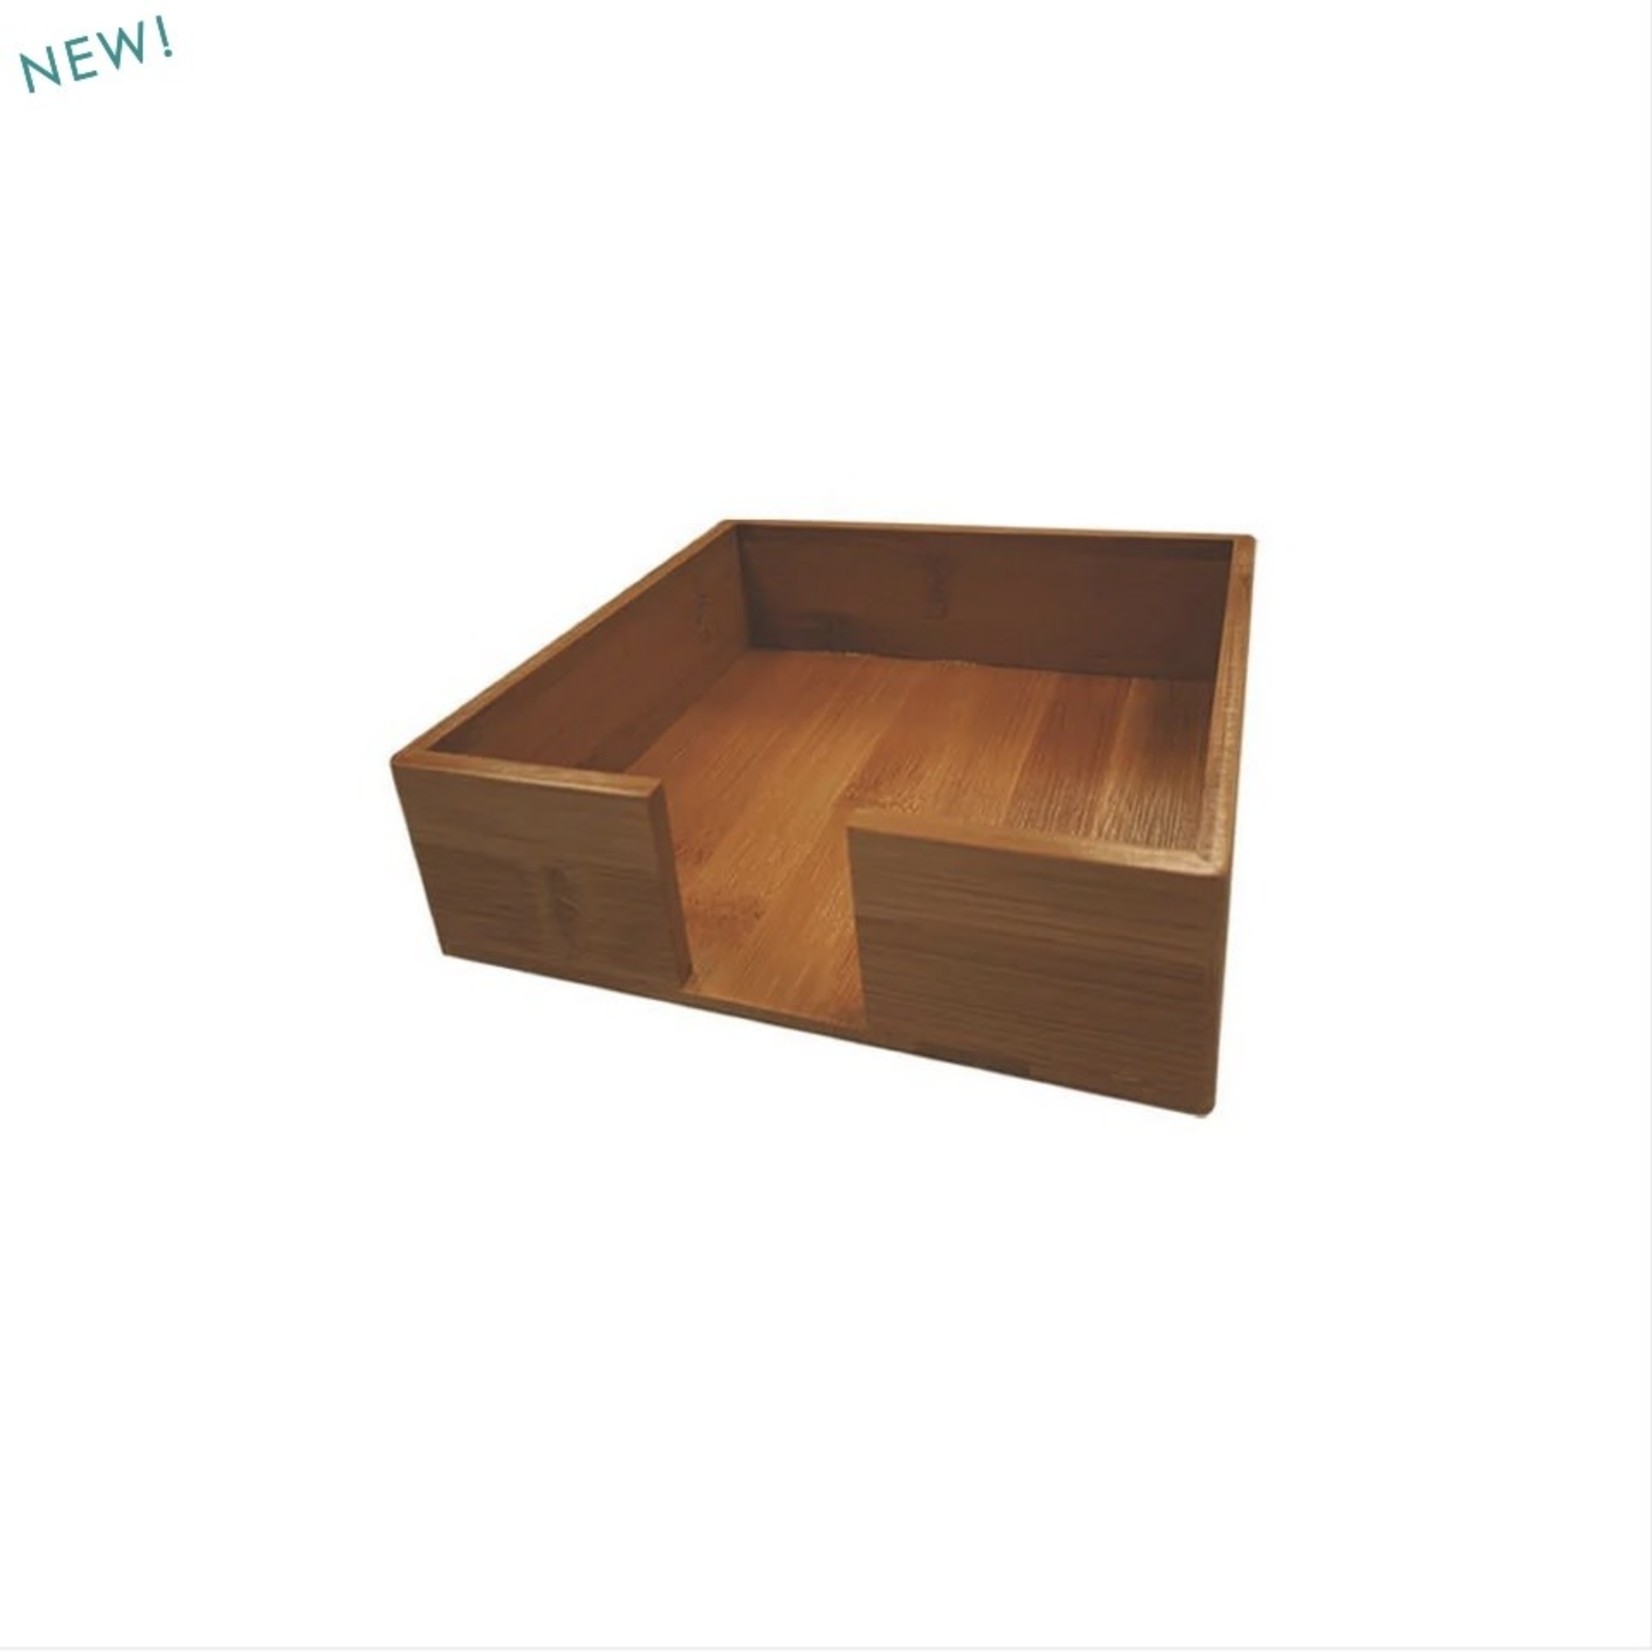 PAPER PRODUCTS DESIGN PPD Cocktail Napkin Caddy- Chestnut